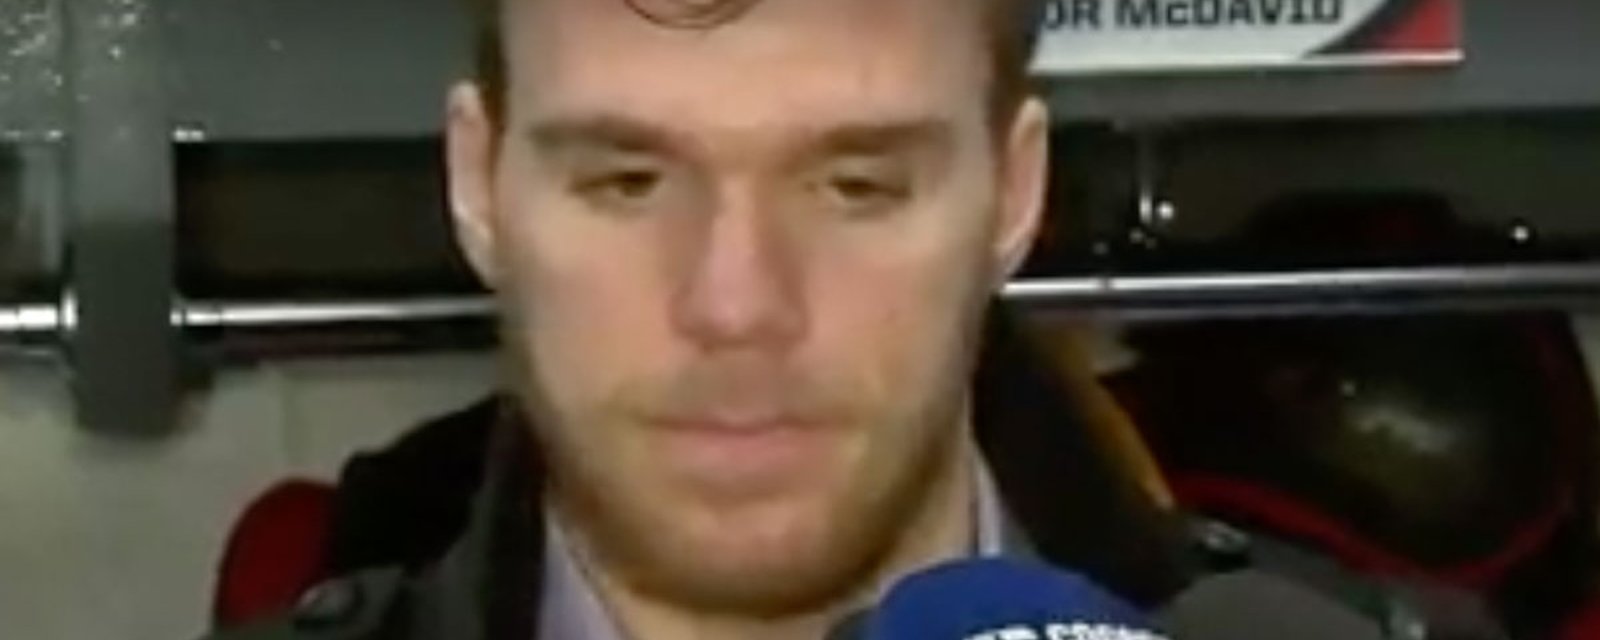 Breaking: McDavid makes depressing comments prior to tonight's game